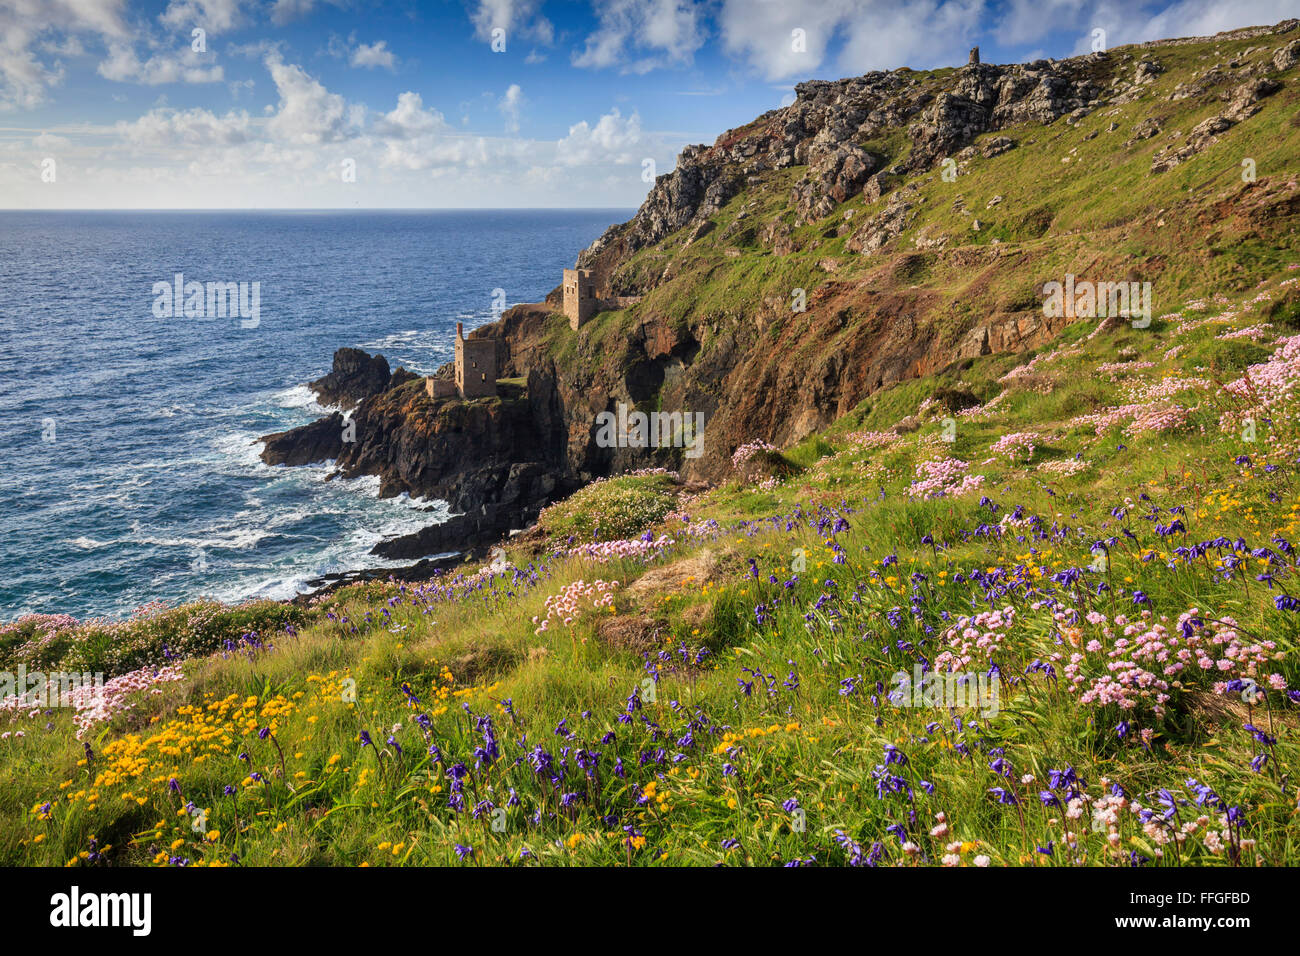 Spring flowers provide the foreground interest in this image of Botallack Mines, near St Just in the far west of Cornwall. Stock Photo